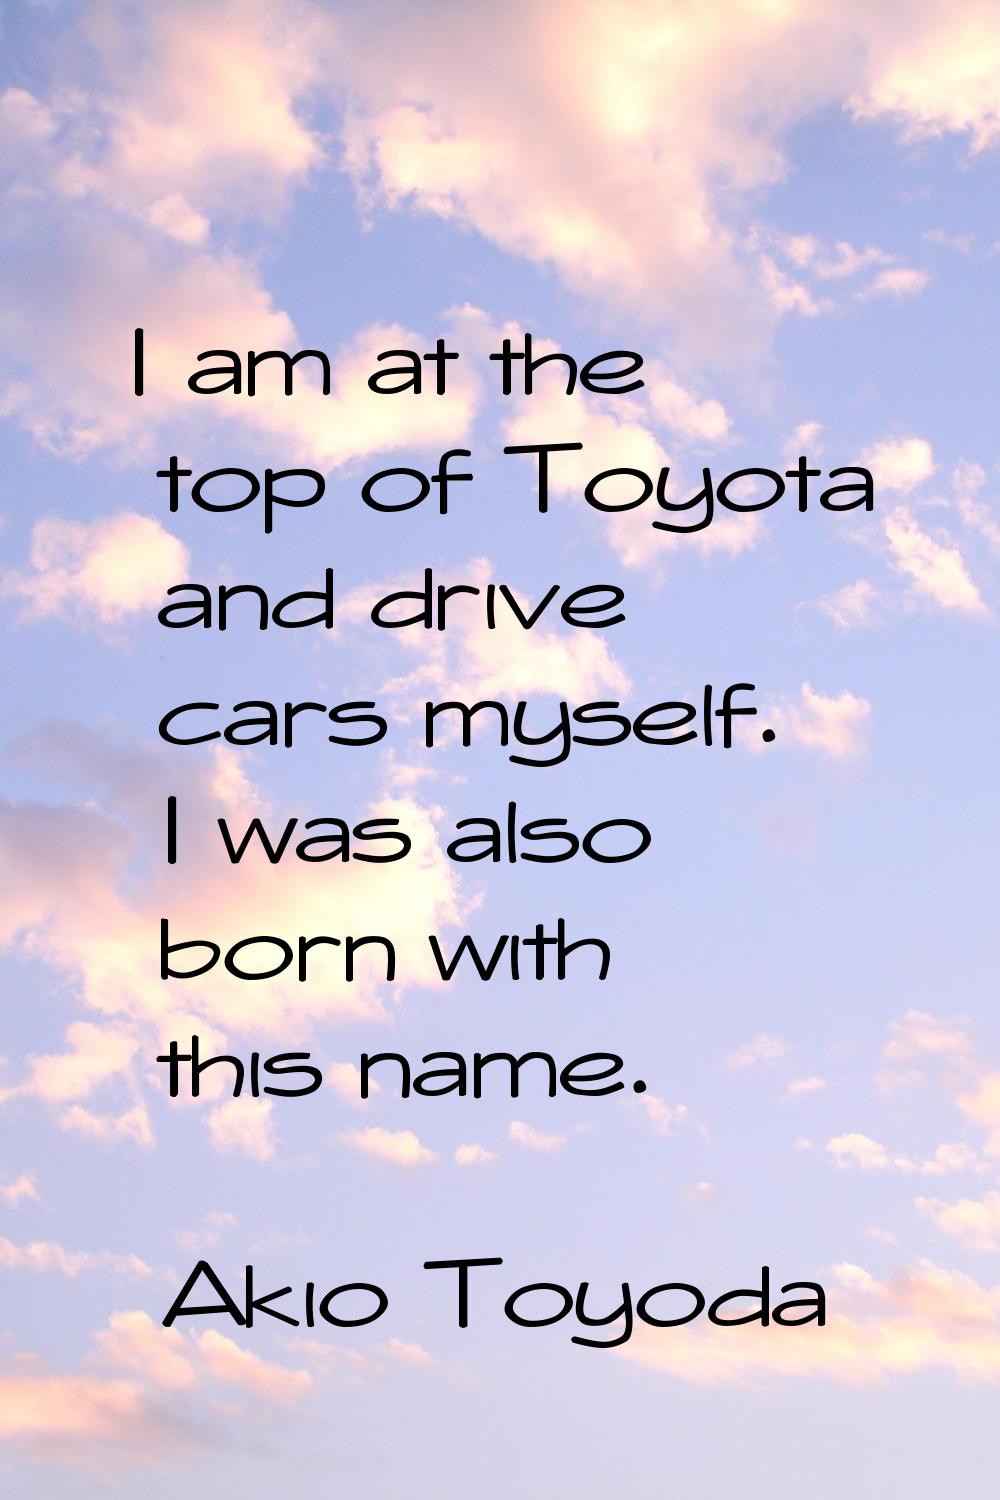 I am at the top of Toyota and drive cars myself. I was also born with this name.